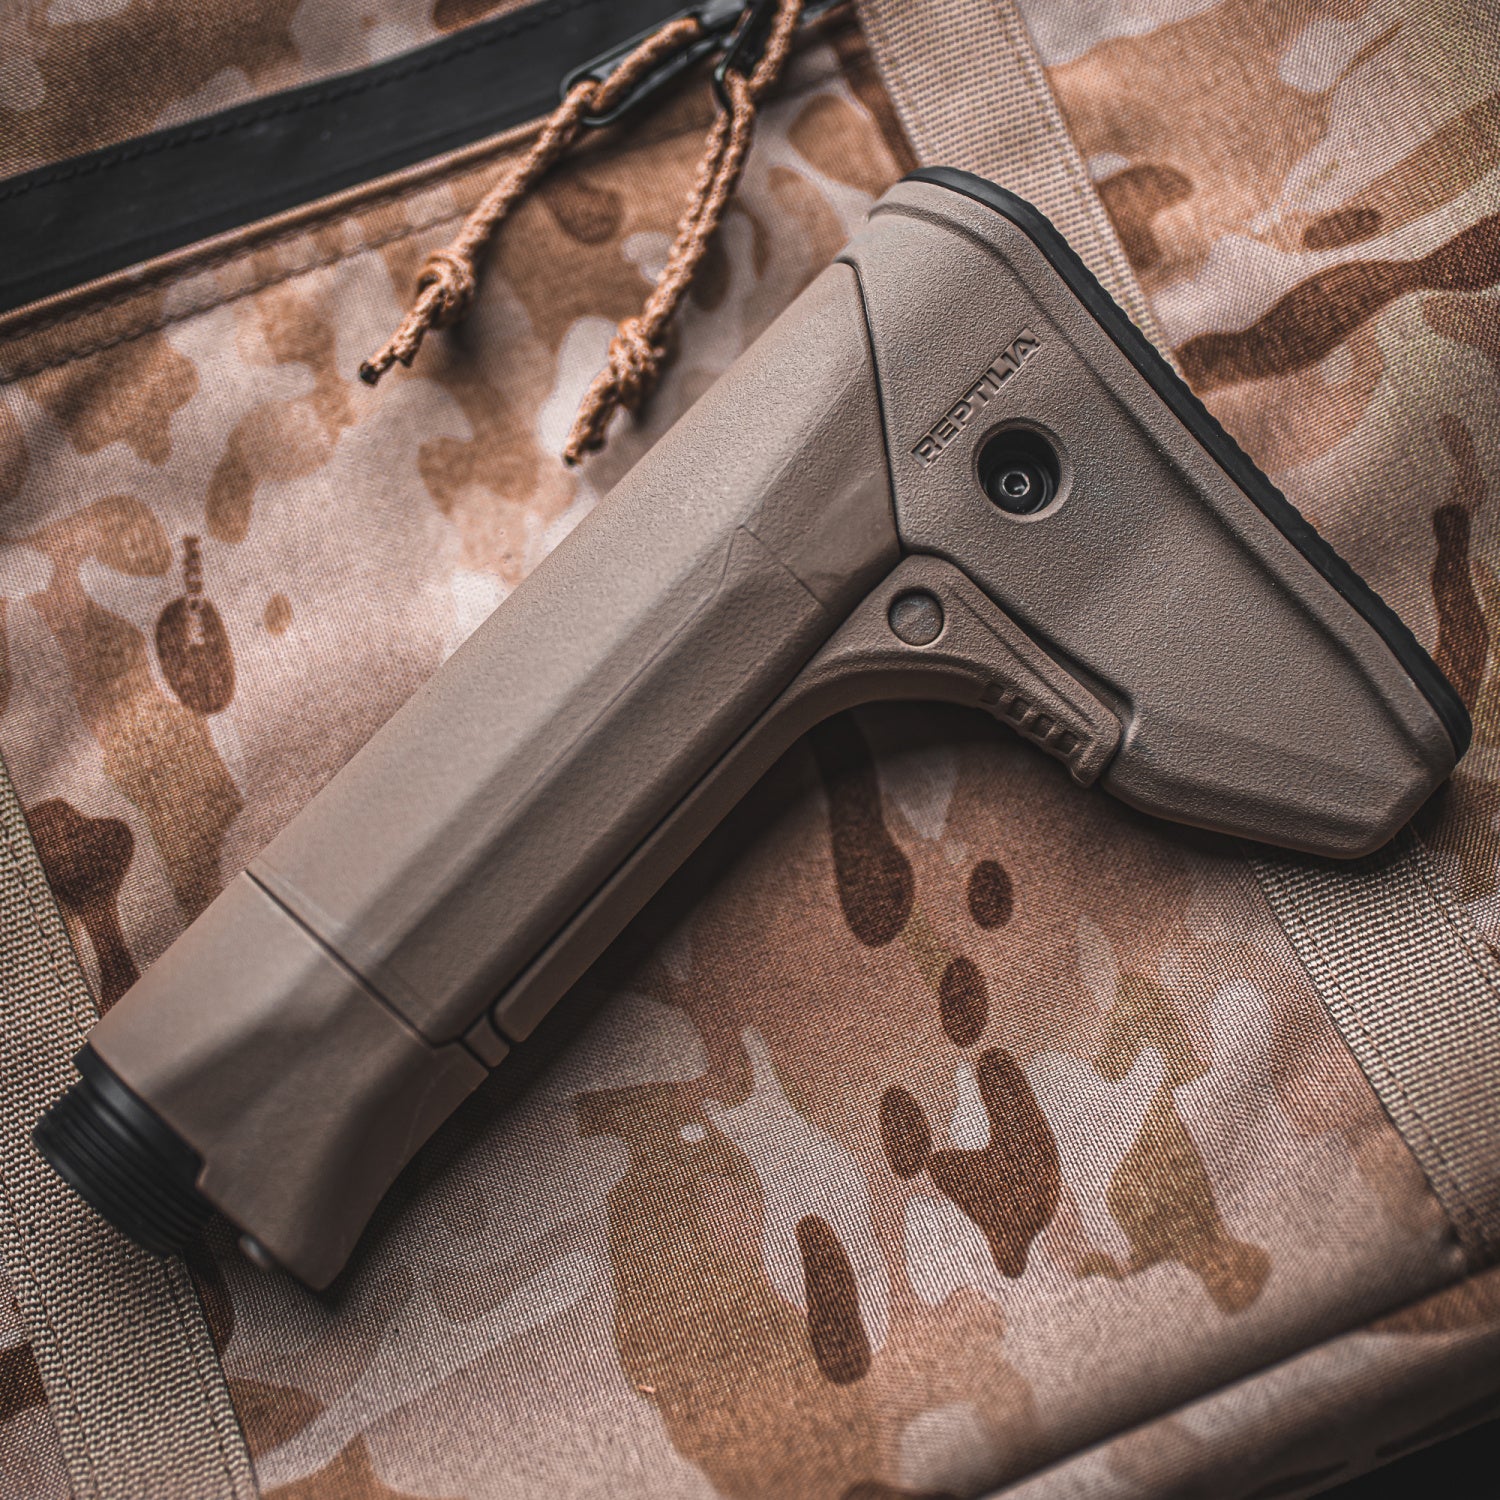 The RECC•E features adjustable length-of-pull, ambi QDs, and is offered in either black or FDE.